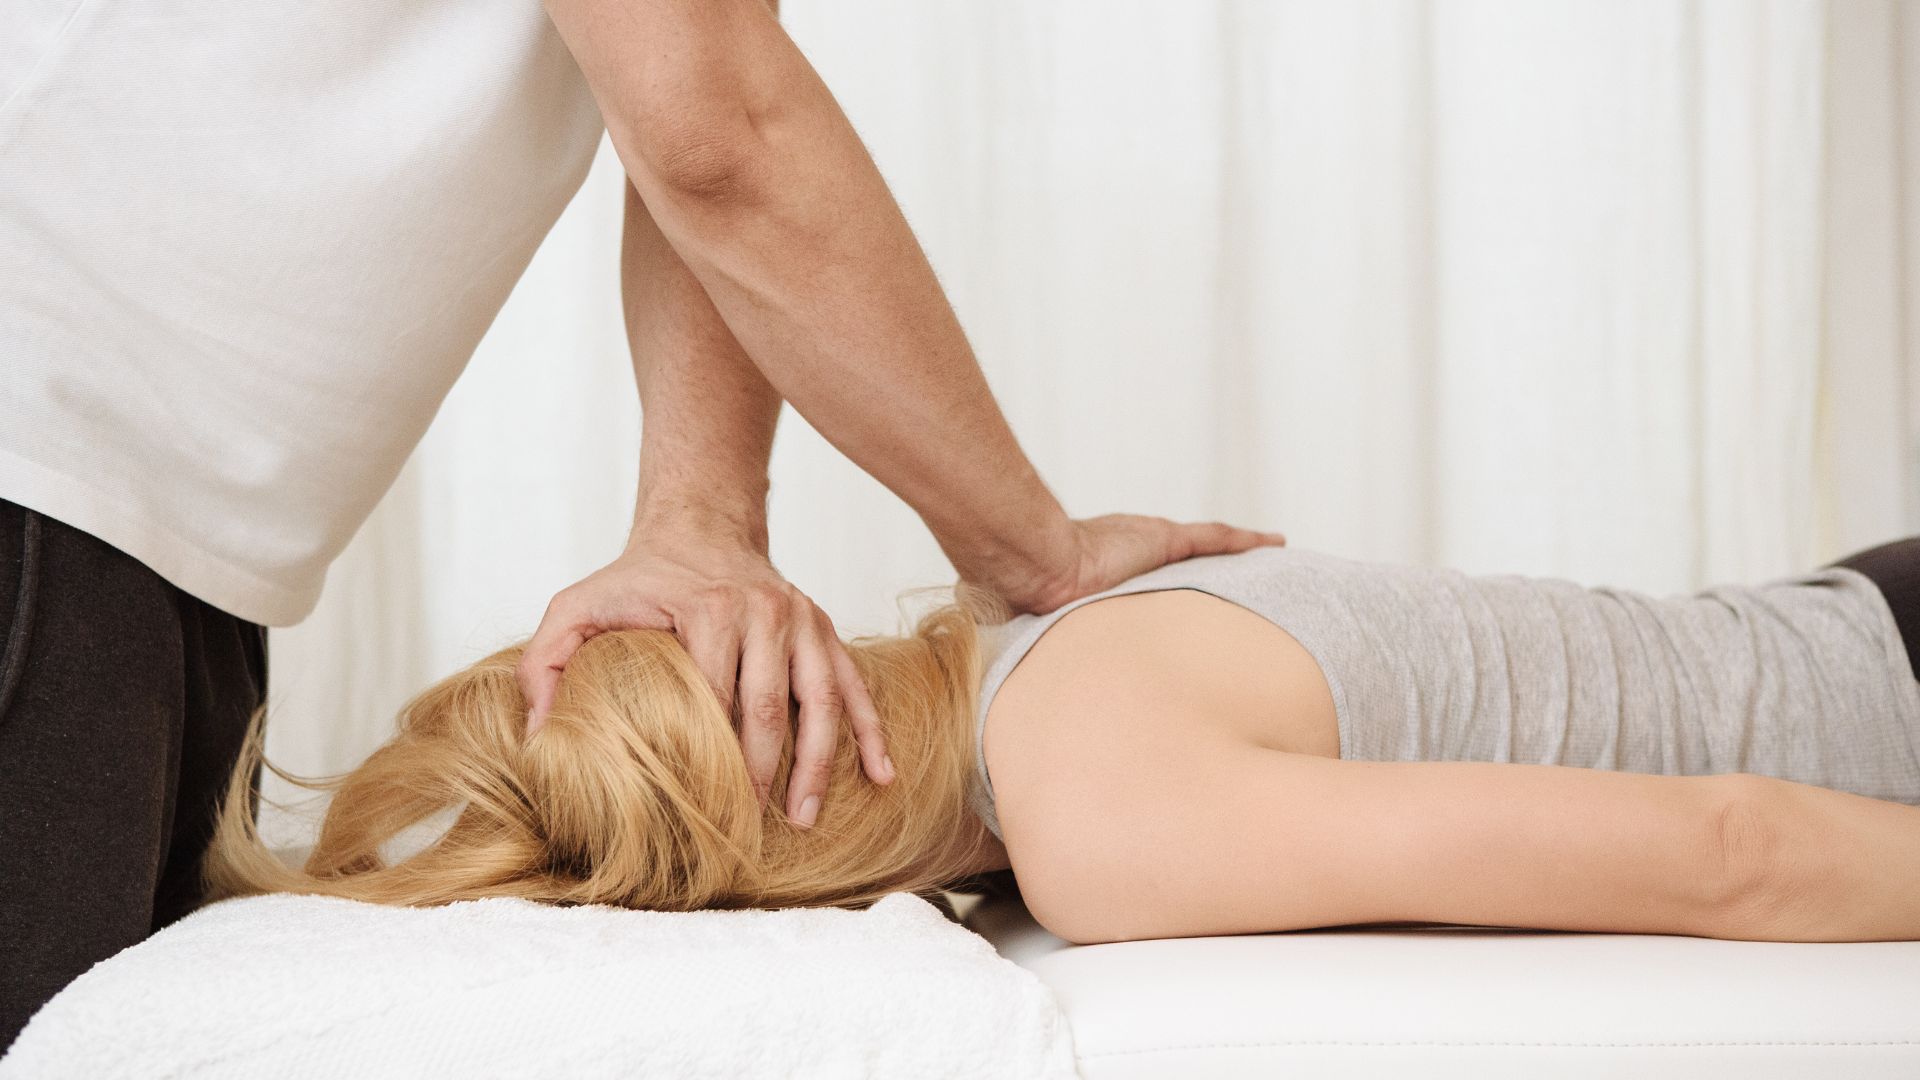 Chiropractor Adjusting A Woman's Back